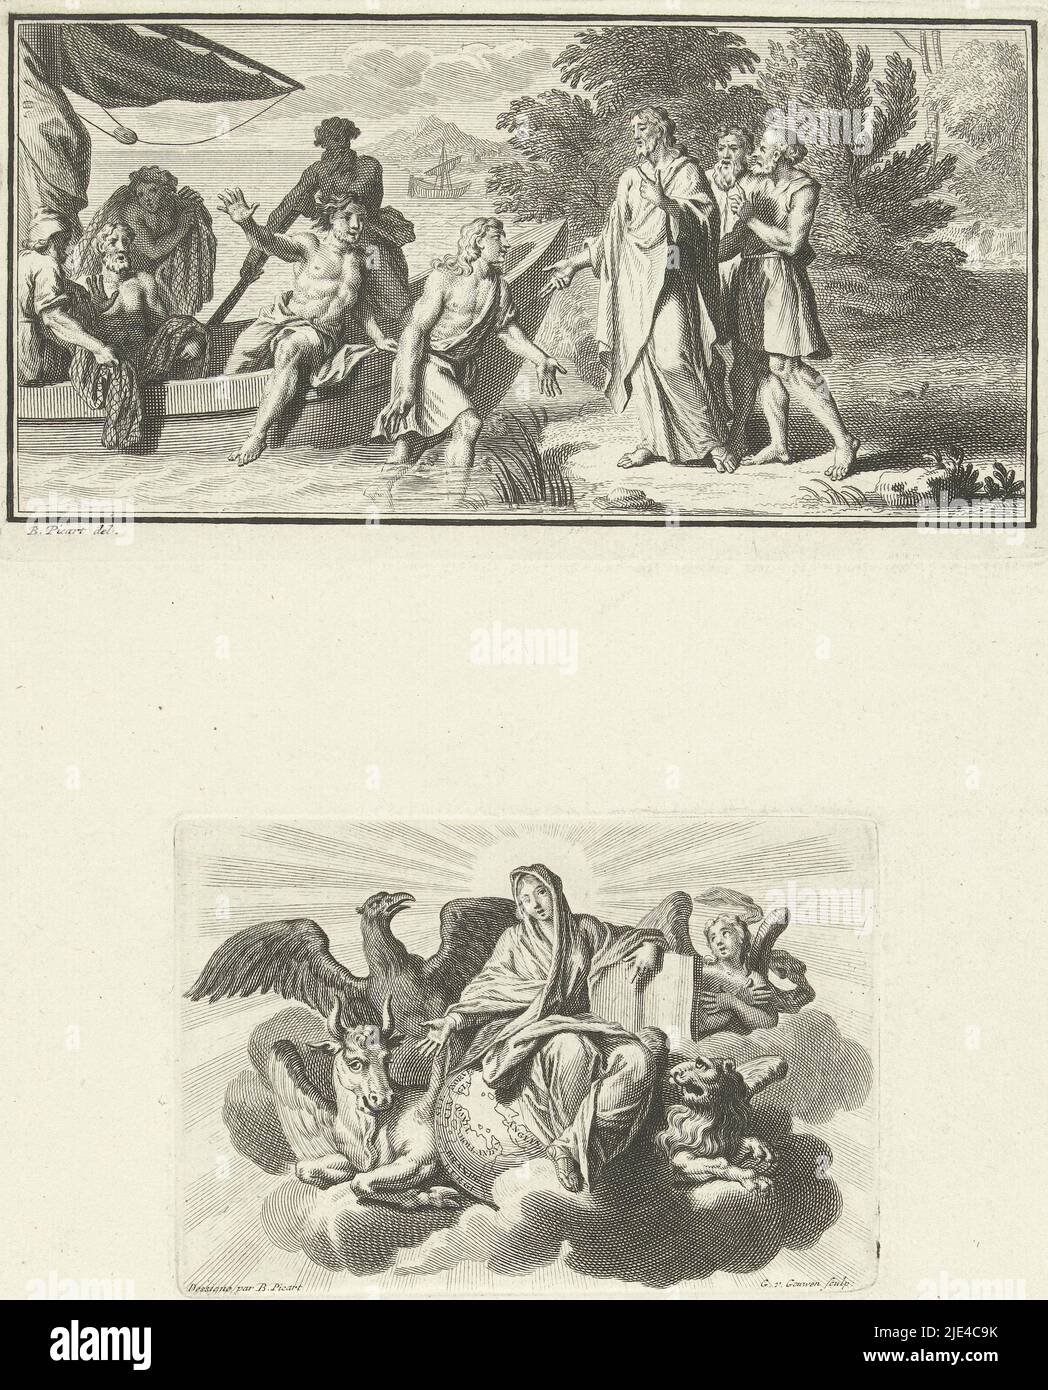 Christ calls apostles among fishermen / Mary and the four apocalyptic animals, Gilliam van der Gouwen, after Bernard Picart, 1709 - c. 1740, Top: Christ stands on the shore of the Sea of Galilee and calls two fishermen, Peter and Andrew, to him. Below: Mary seated on a globe in the clouds. Around her the four apocalyptic animals., print maker: Gilliam van der Gouwen, (mentioned on object), intermediary draughtsman: Bernard Picart, (mentioned on object), Amsterdam, 1709 - c. 1740, paper, engraving, w 172 mm × h 90 mm × h 79 mm × w 112 mm Stock Photo